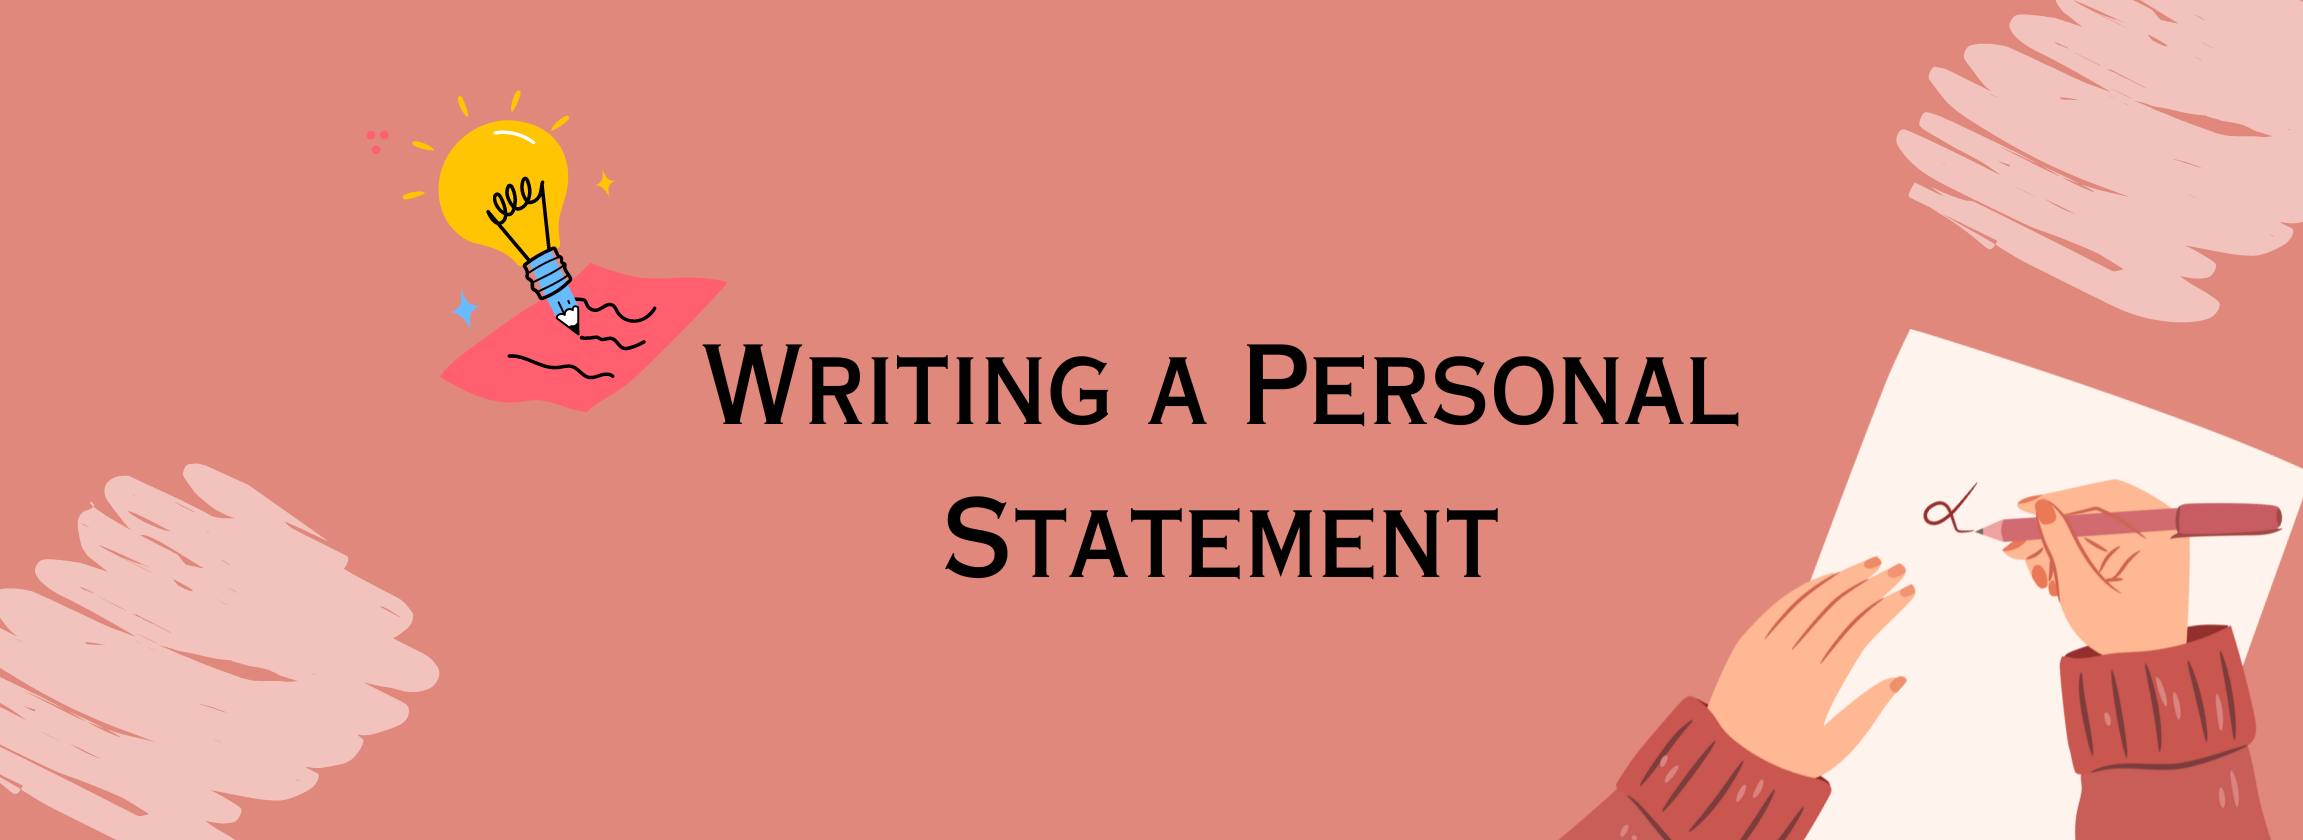 what to write in personal statement for job application